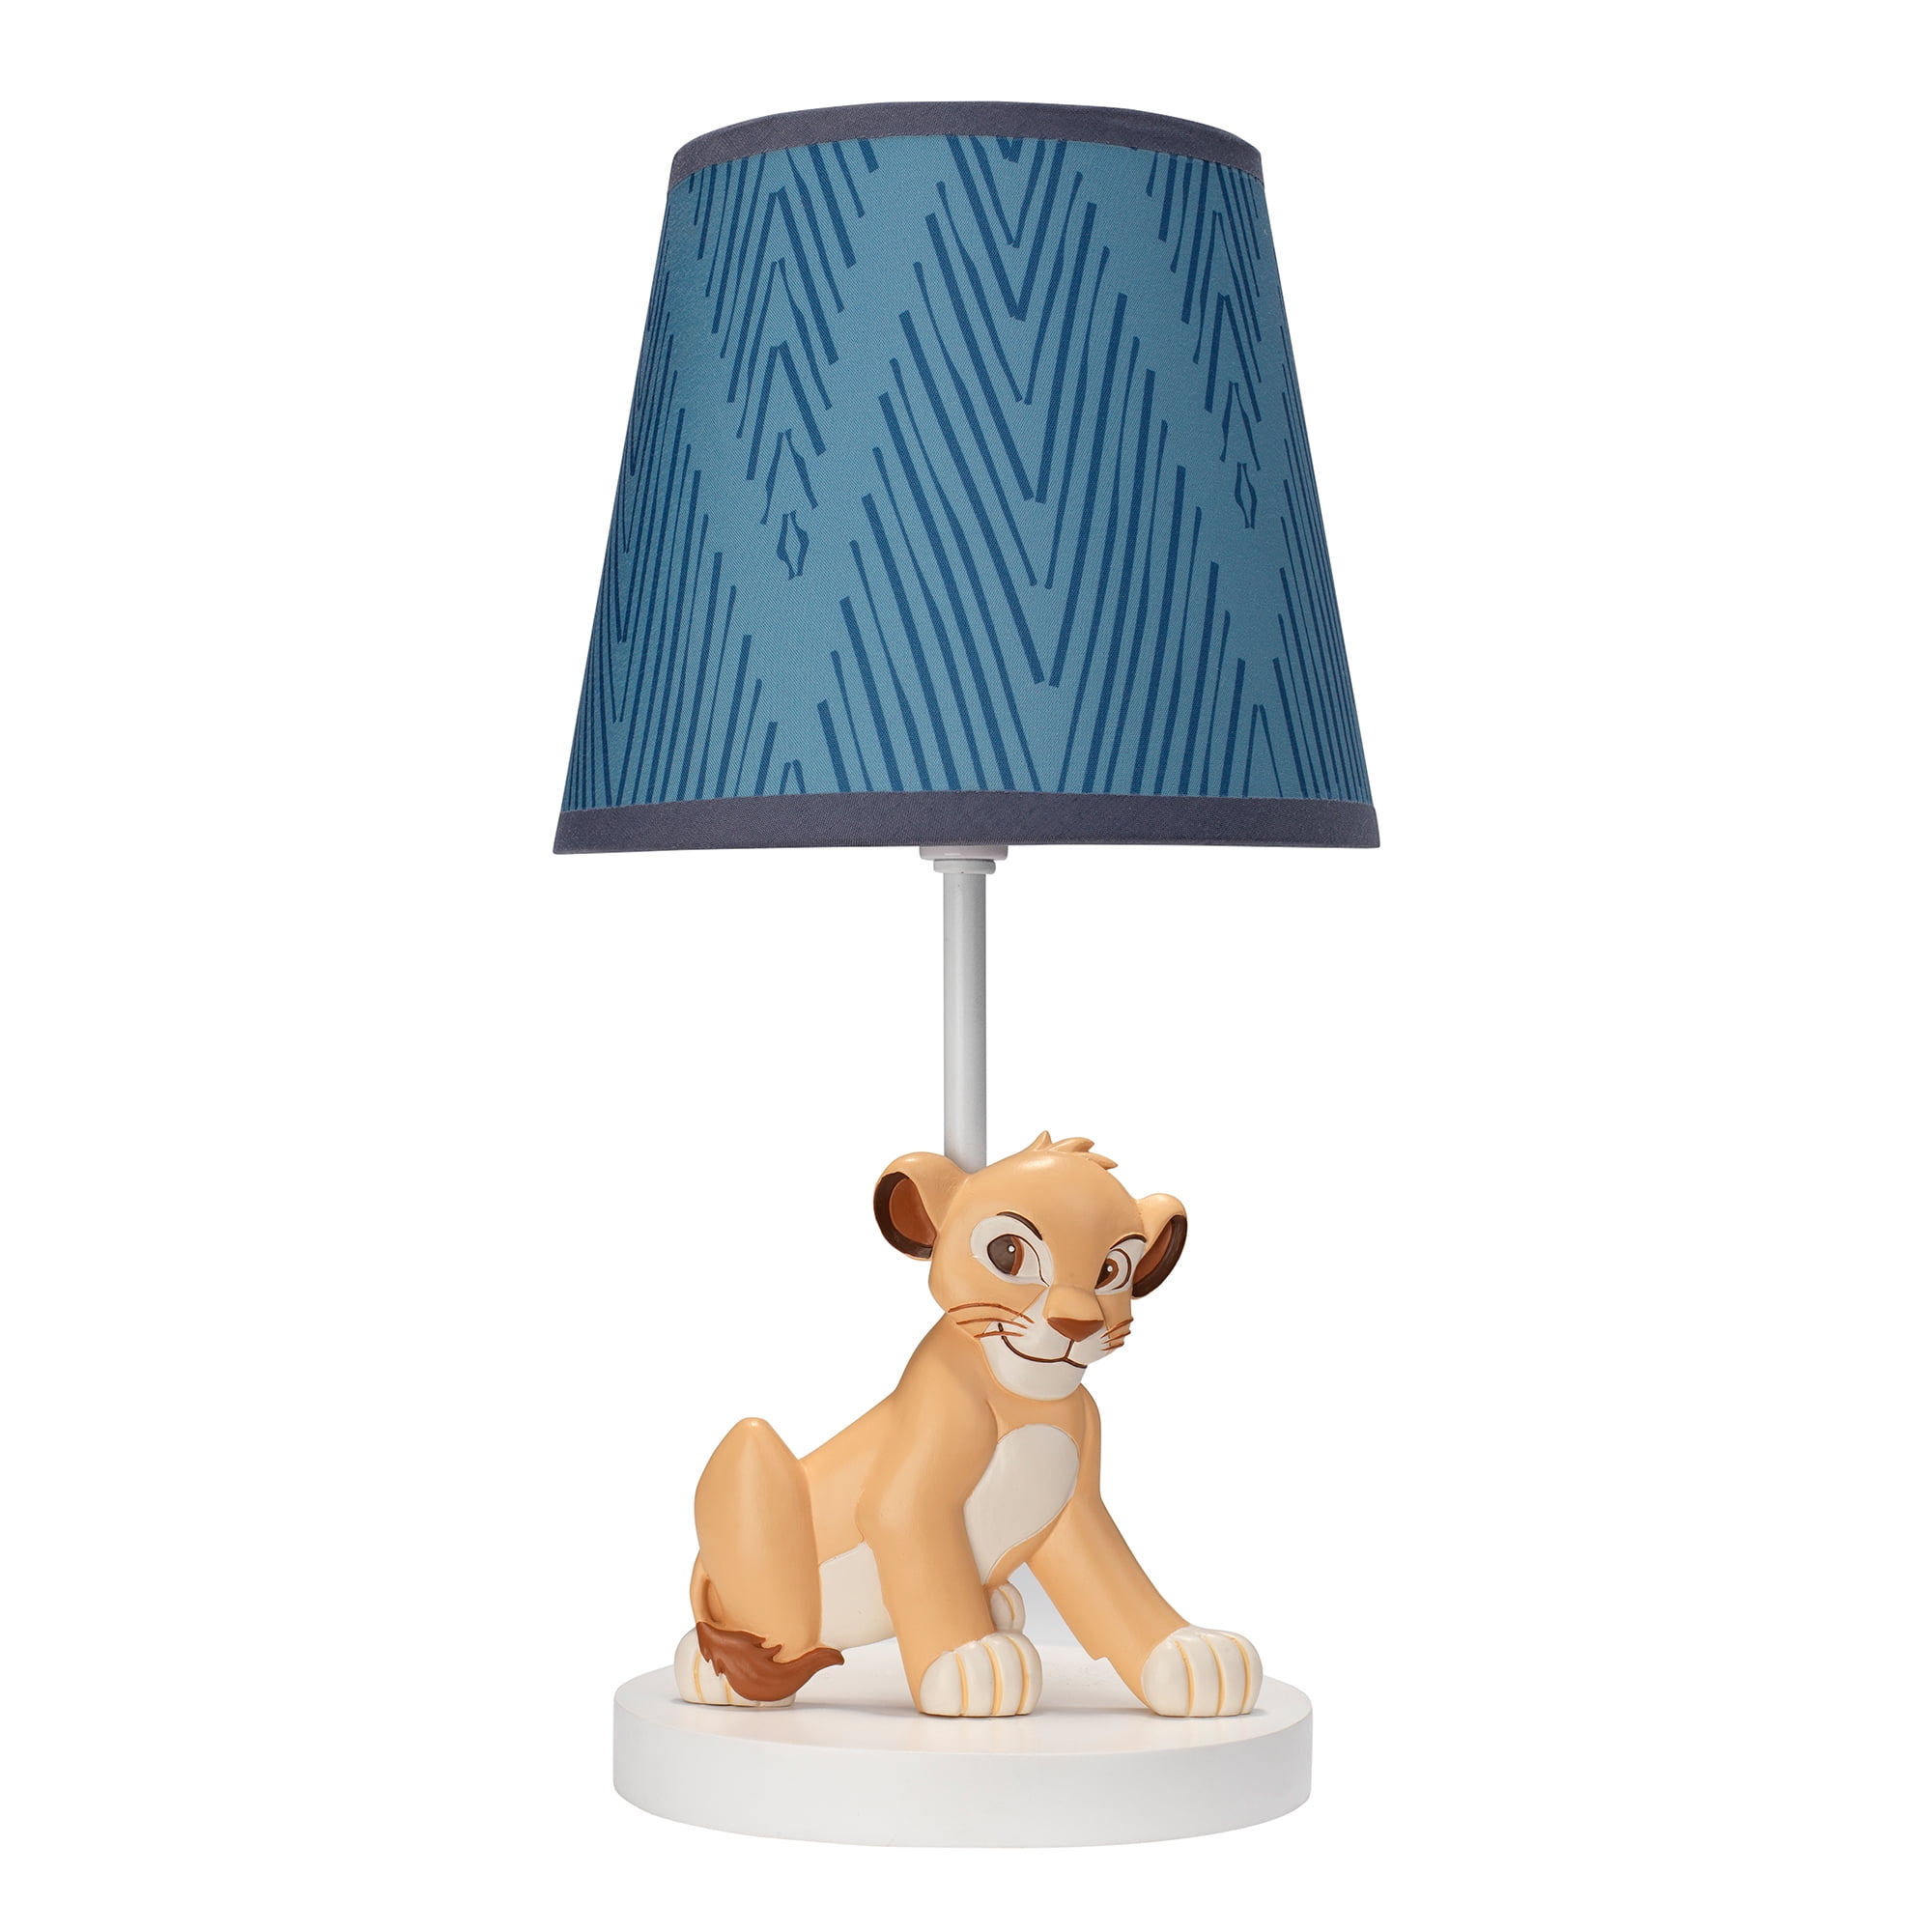 light shade for baby room